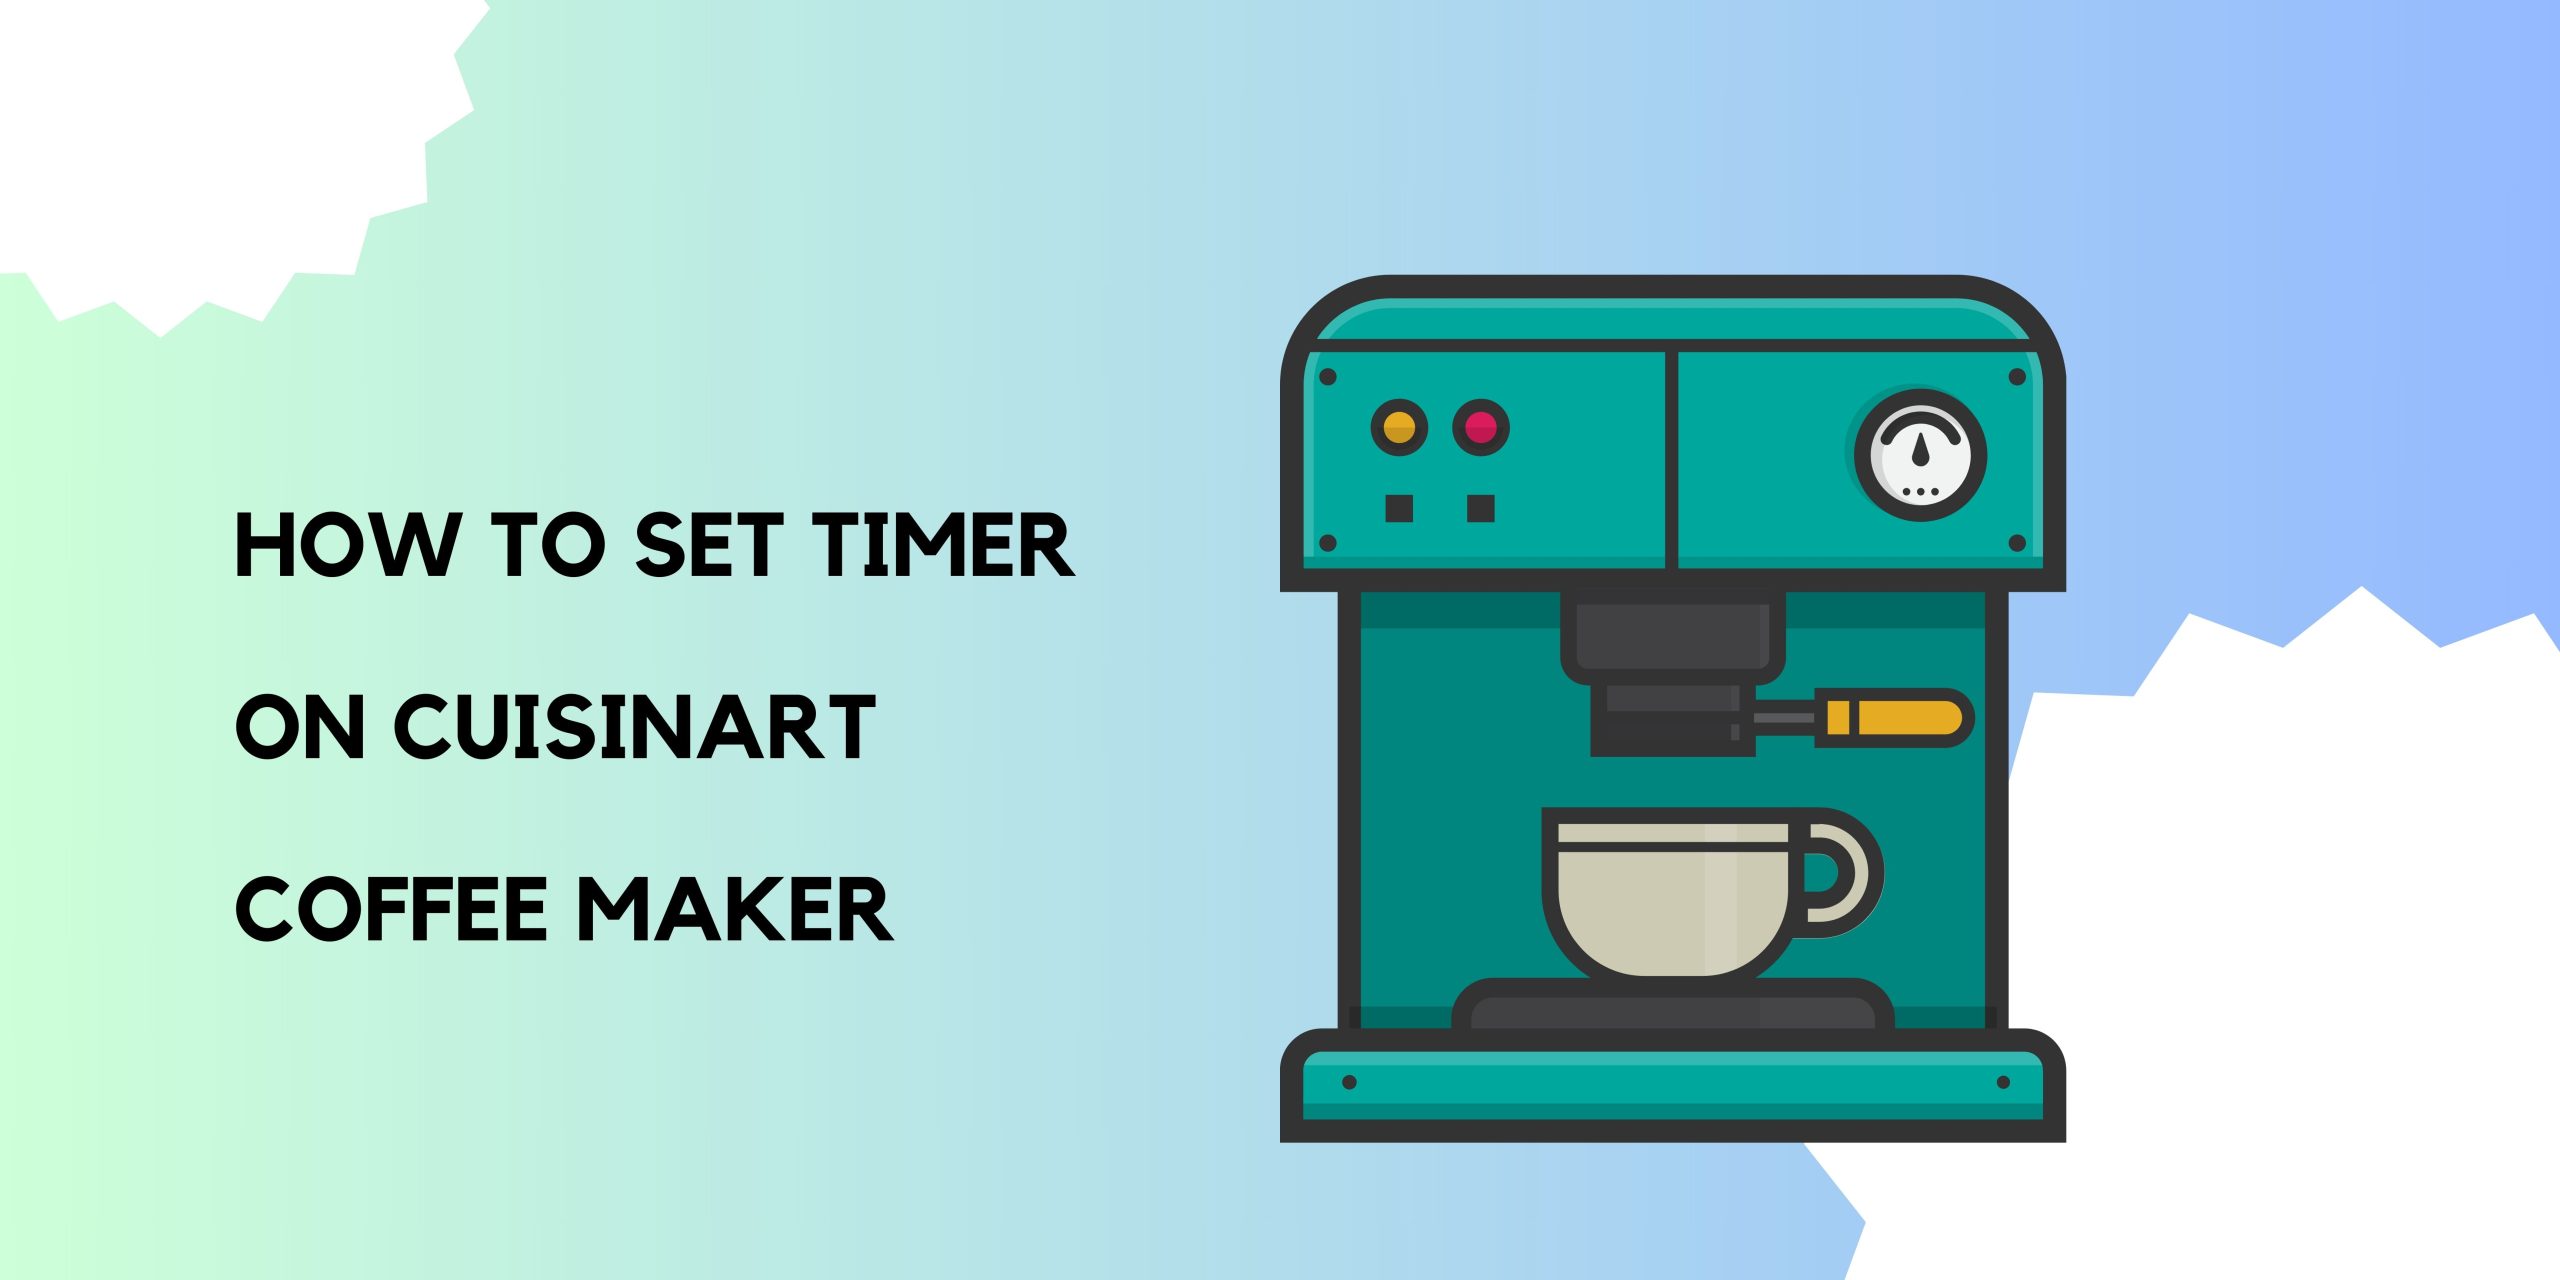 How to set timer on cuisinart coffee maker